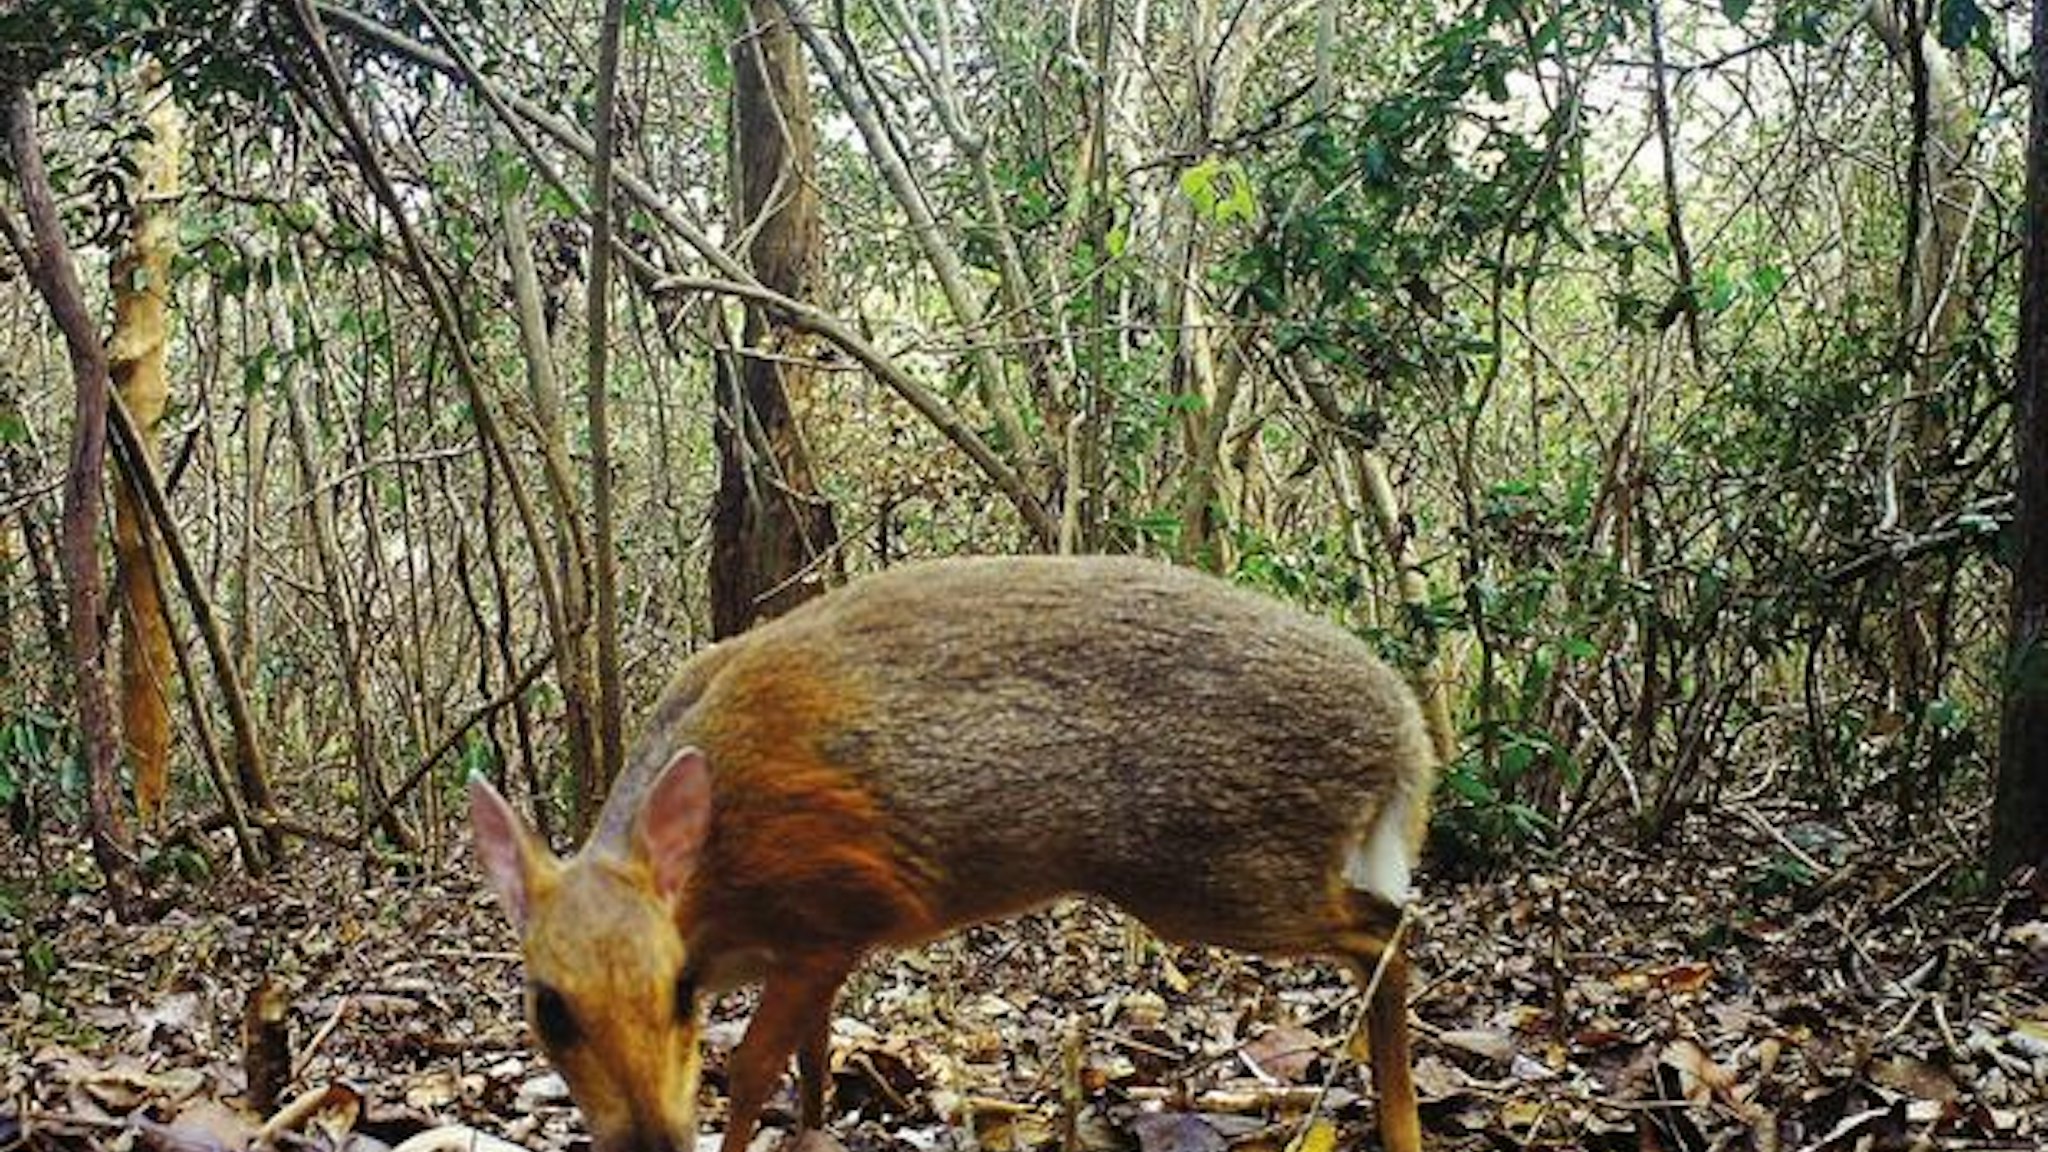 Miniature 'Fanged' Deer-Like Mammal Long Thought Extinct Rediscovered In Vietnam